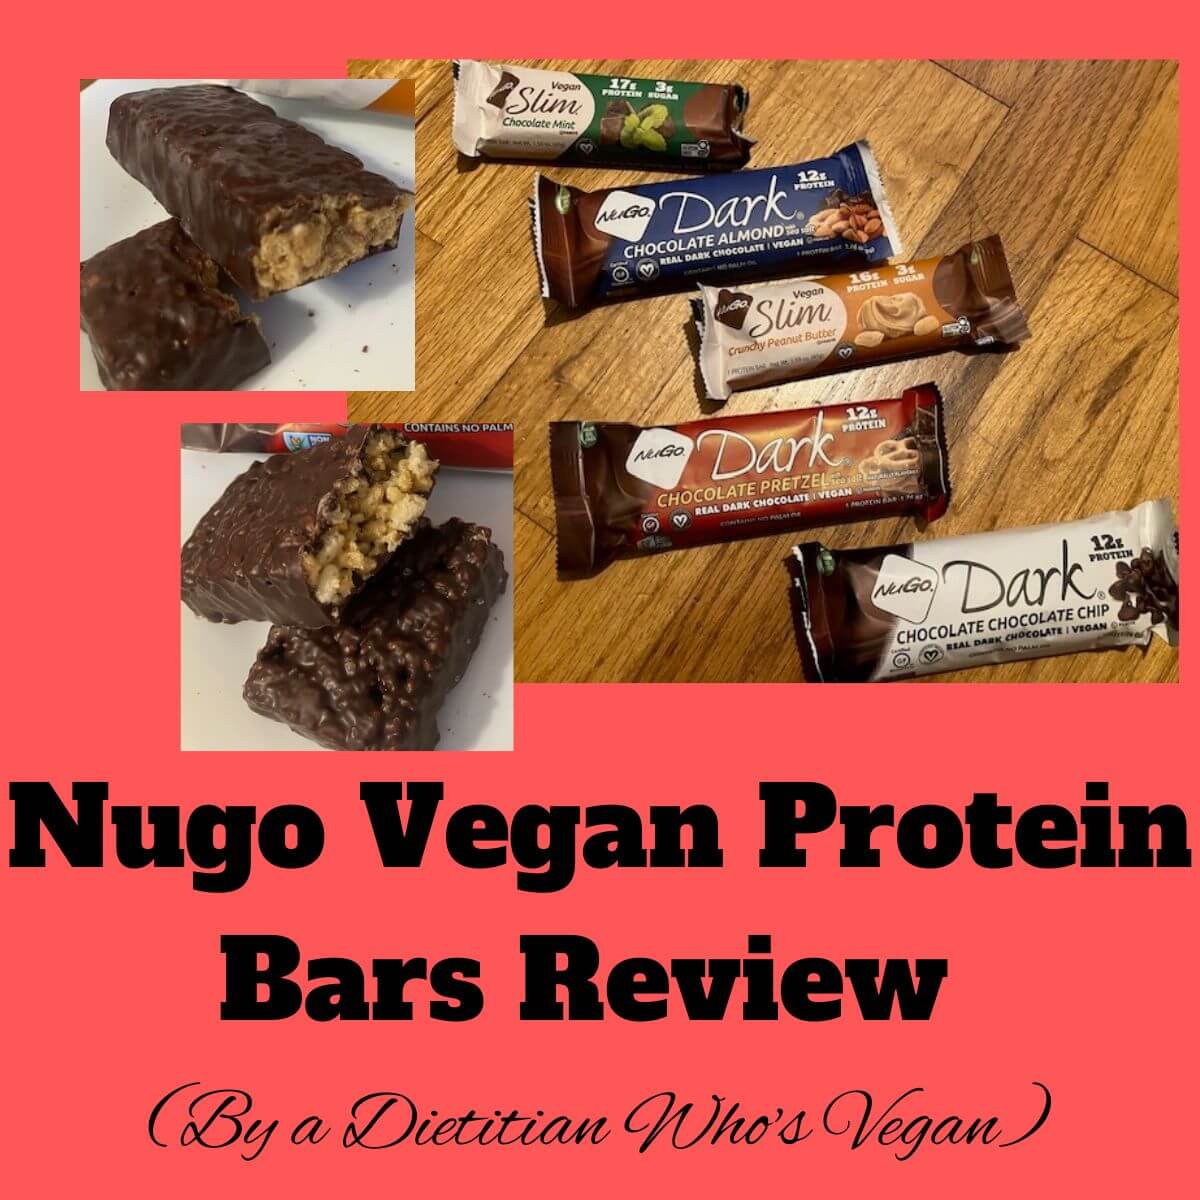 Picture of a Nugo Slim bar and a Nugo Dark bar cut in half to show texture, next to a variety of Nugo packages. Text reads: Nugo Vegan Protein Bars Review (by a dietitian who's vegan)